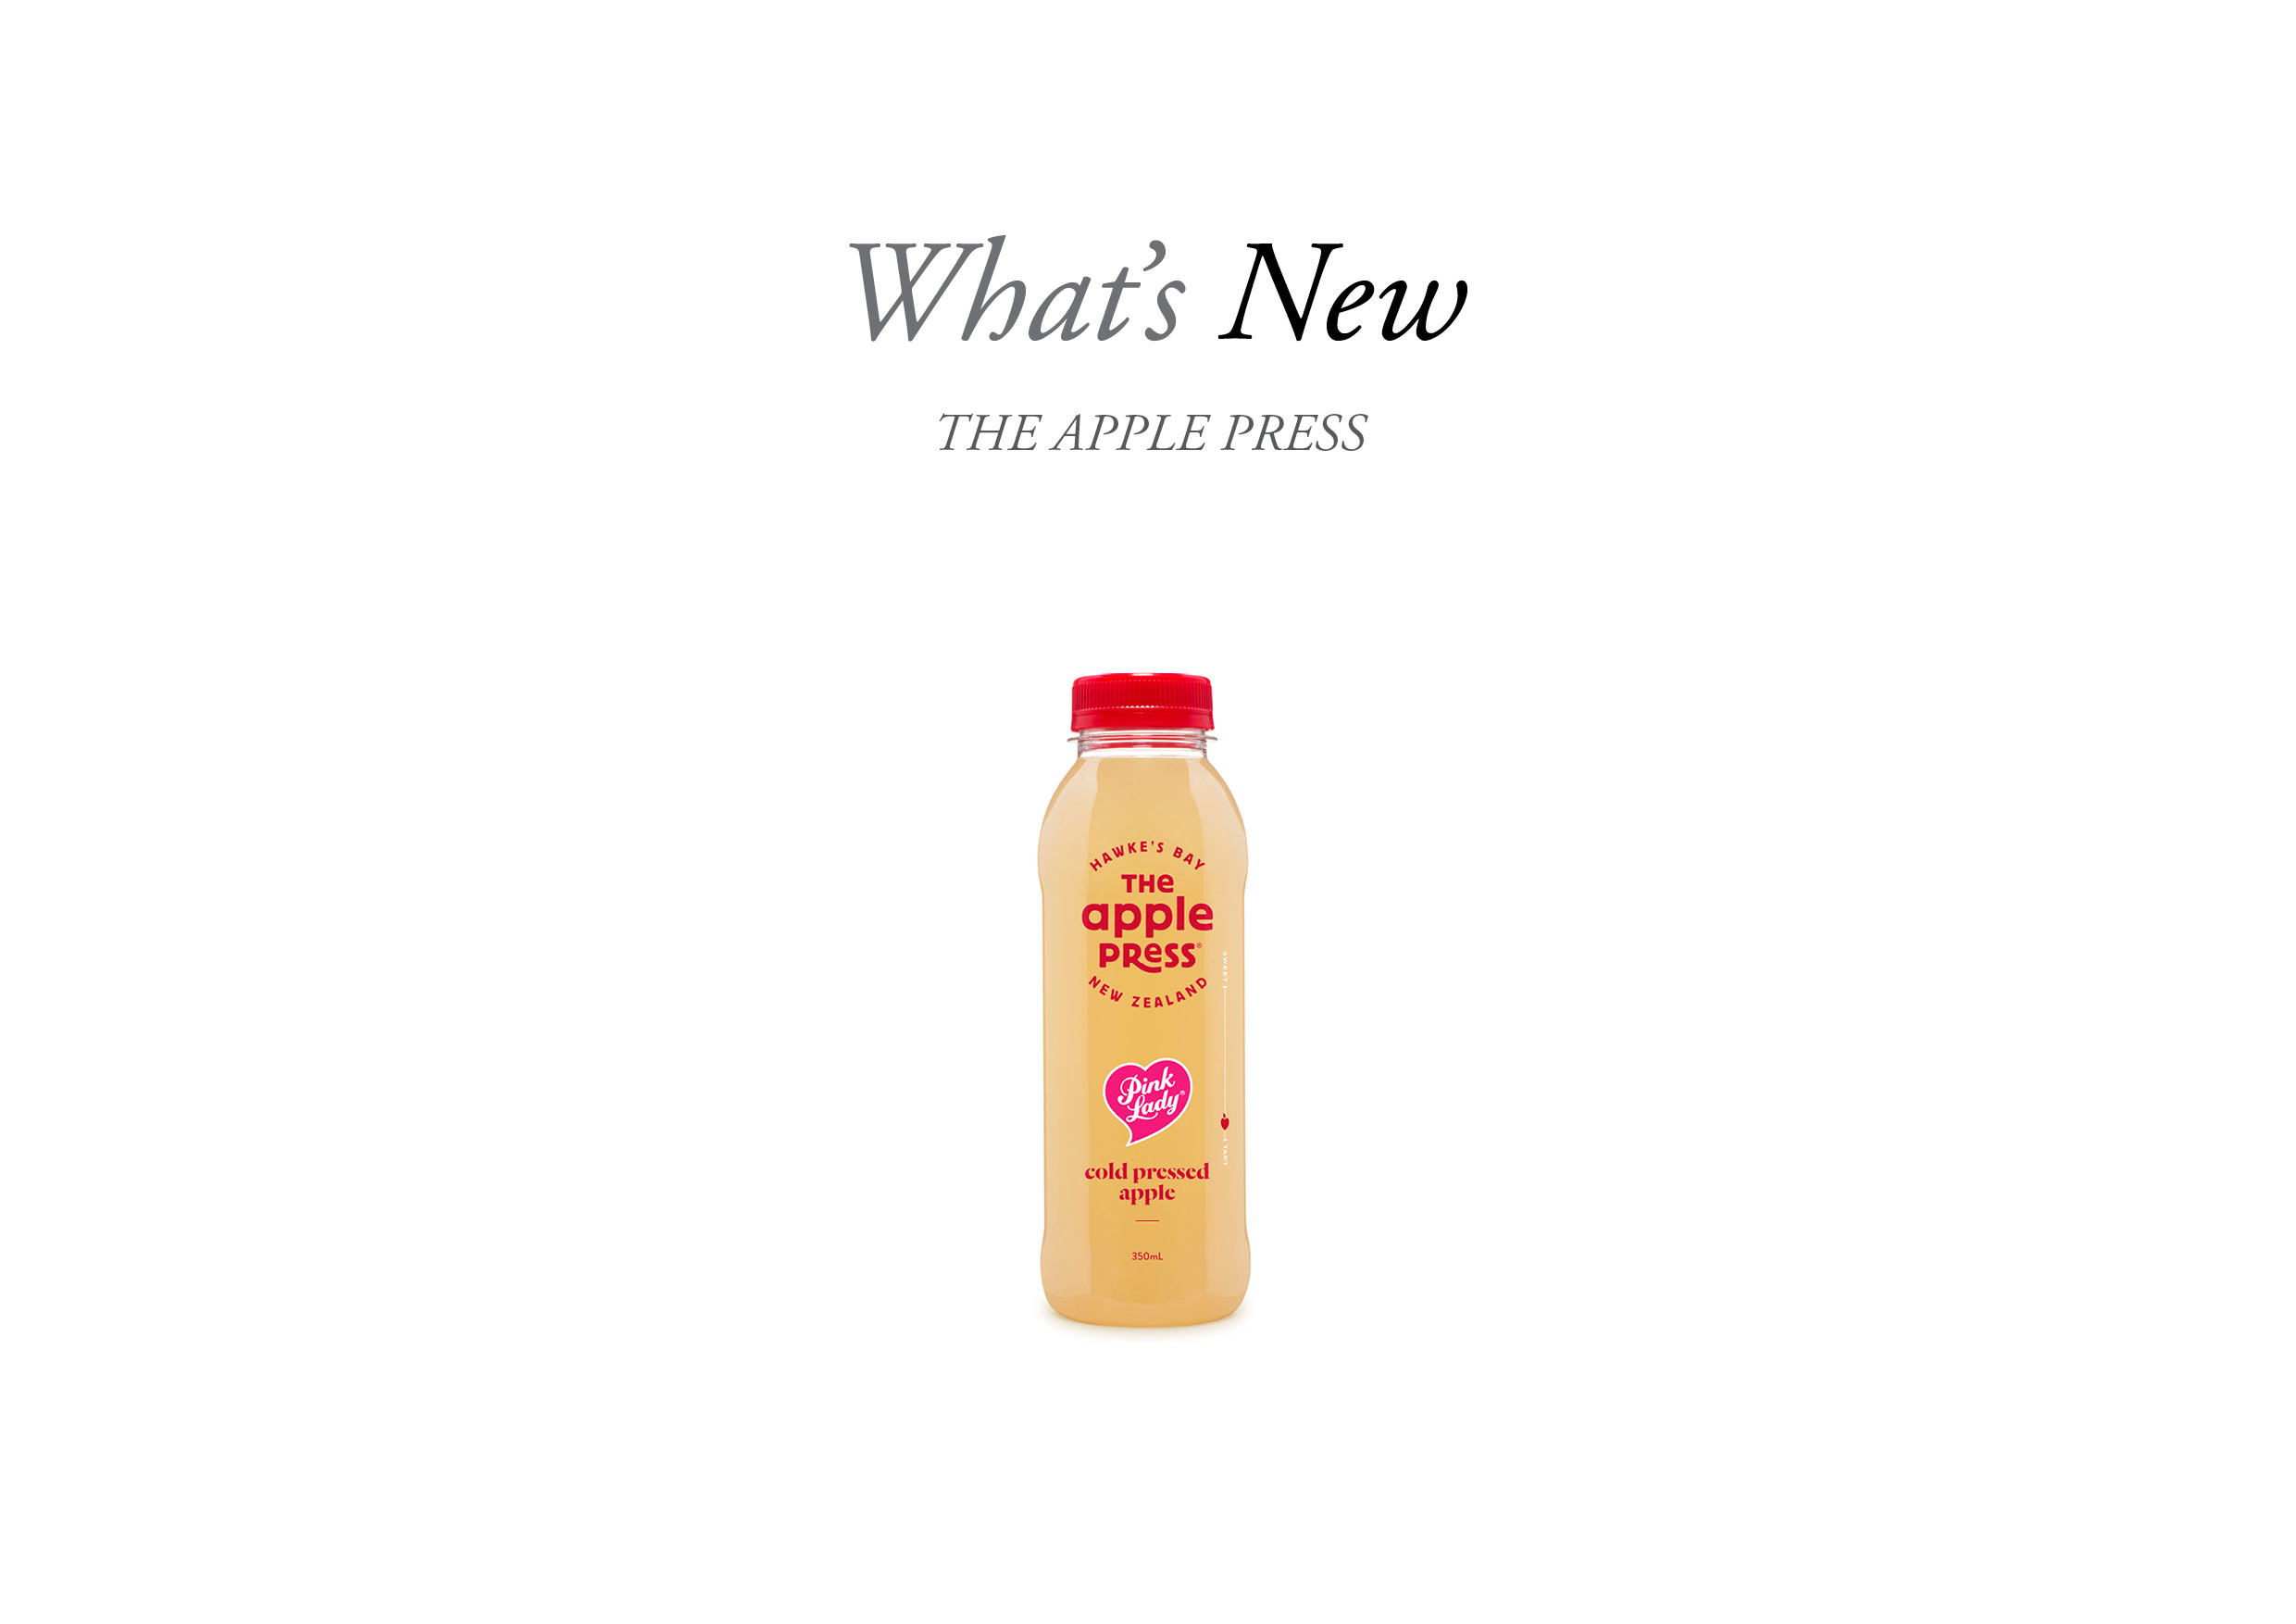 the apple press pink lady bottle with a what's new symbol